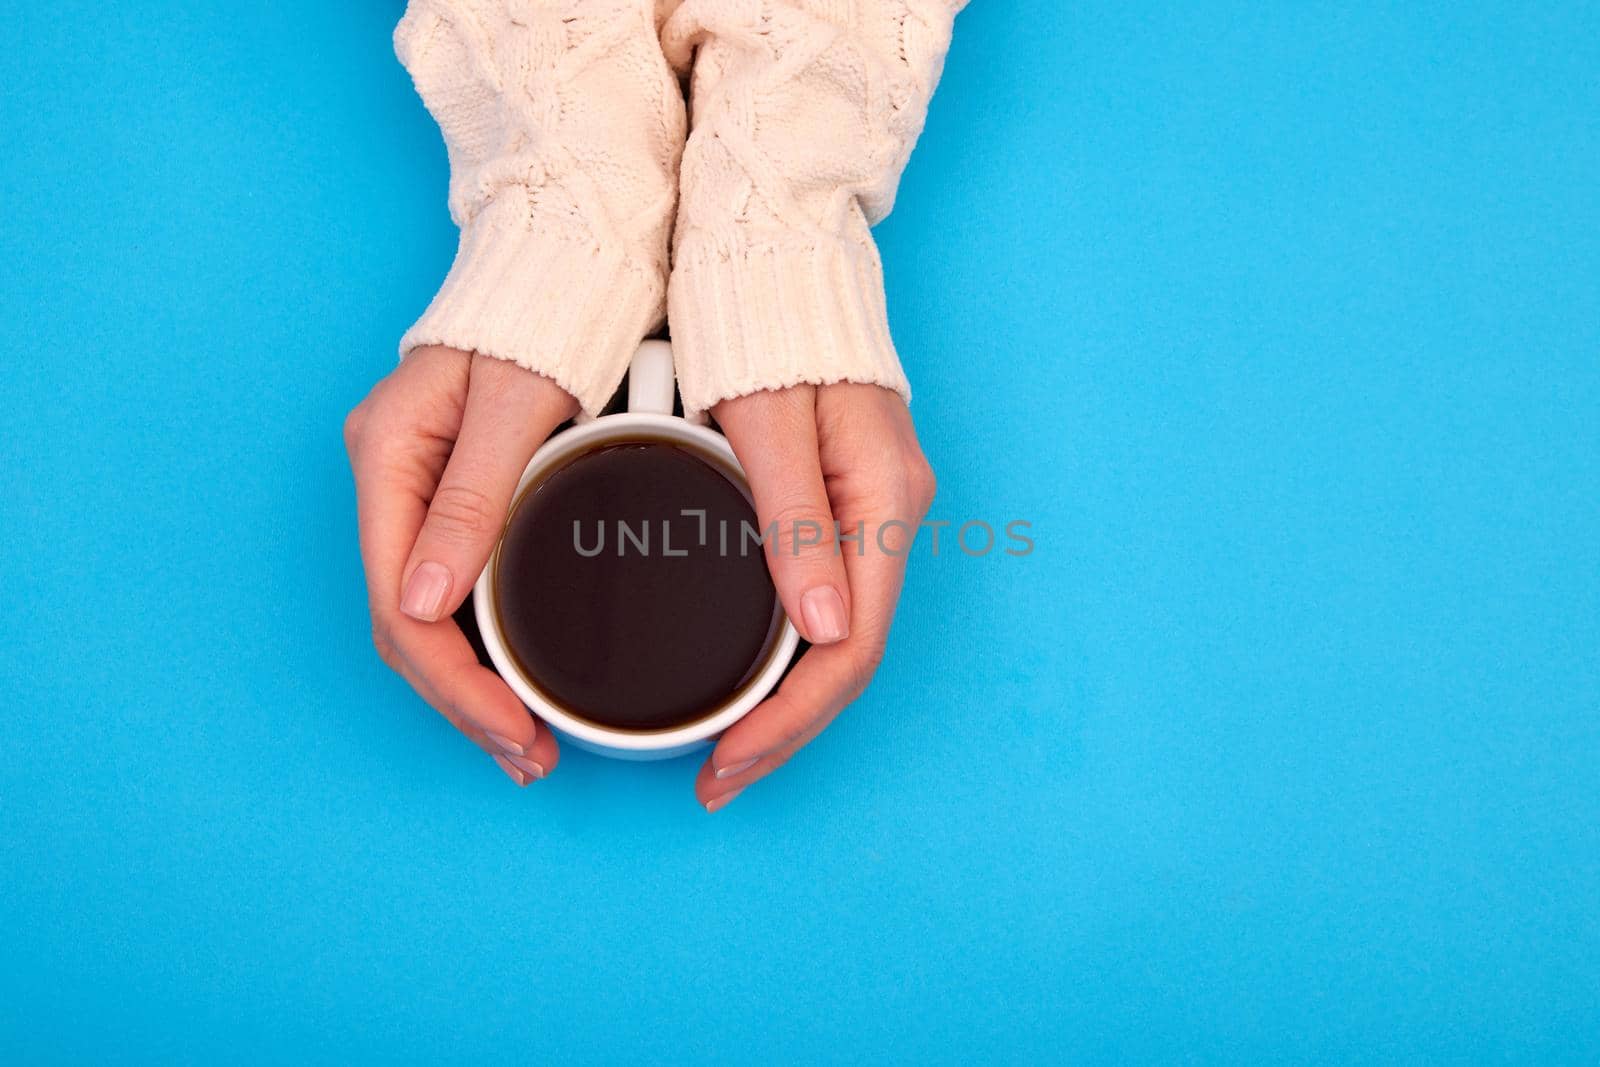 Hands coffee sweater top view blue background by Demkat